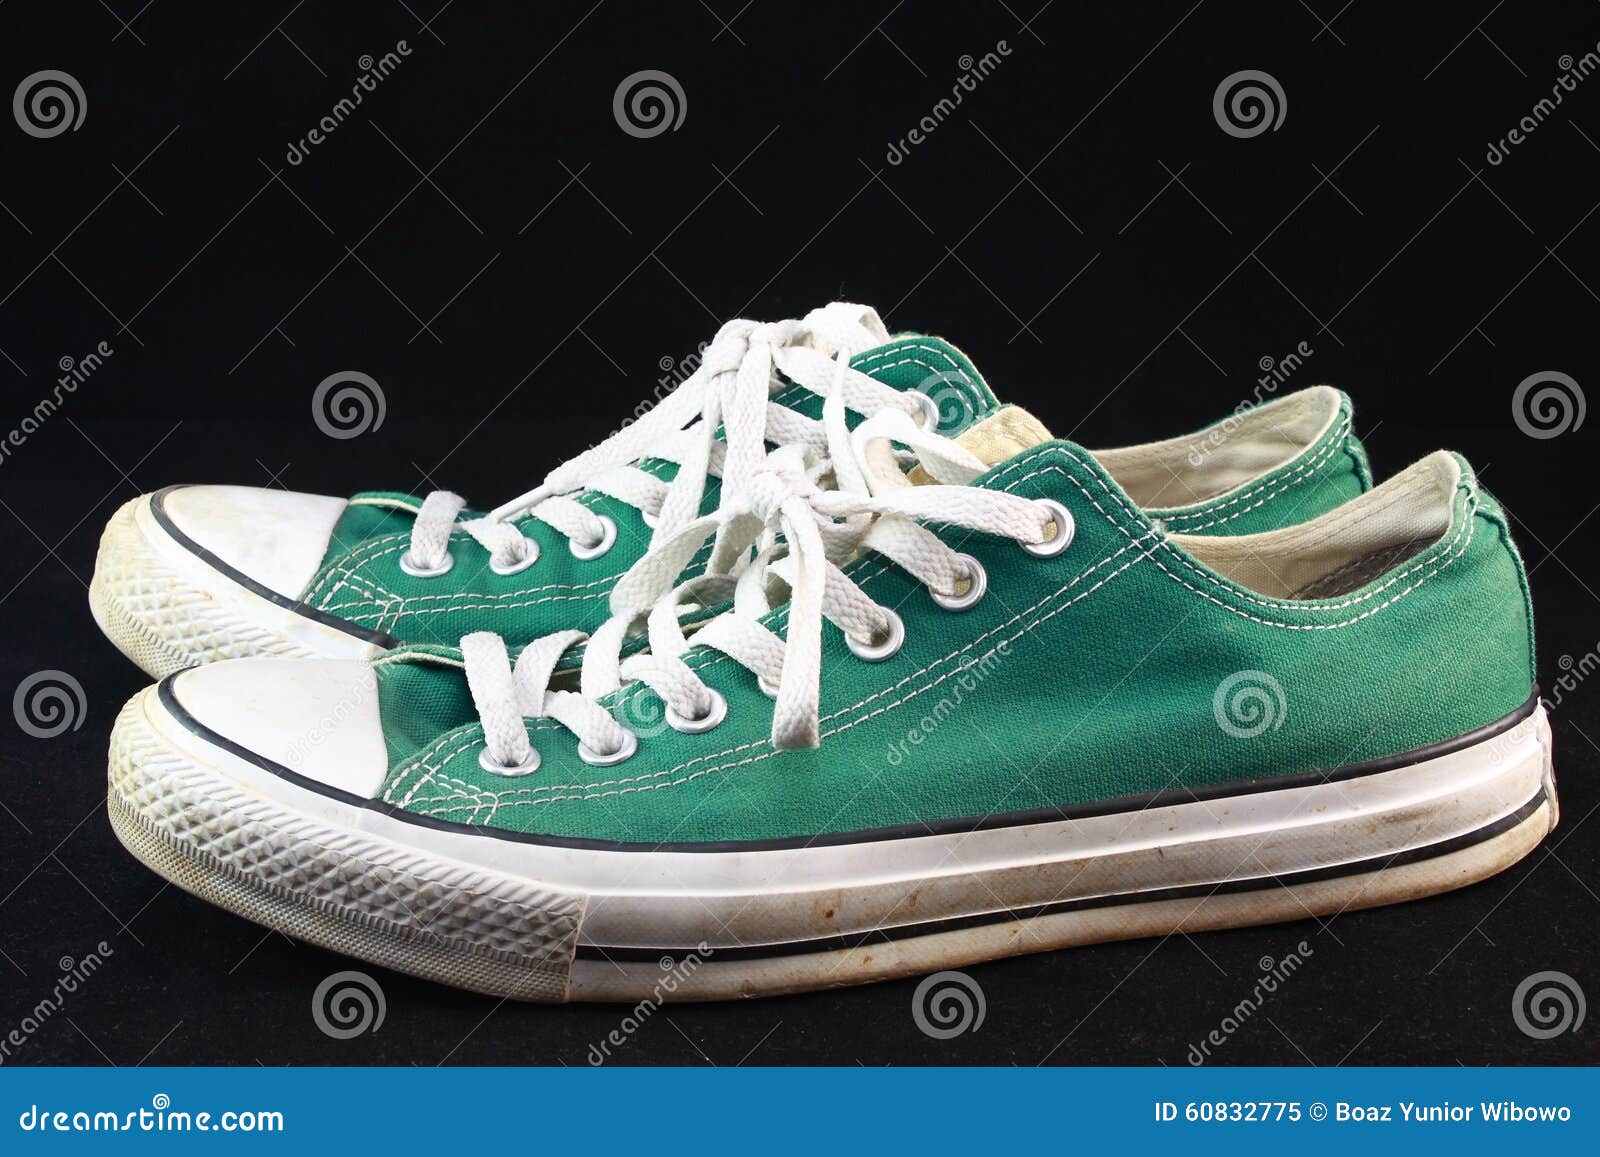 Green Sneaker stock image. Image of rubber, plimsoll - 60832775